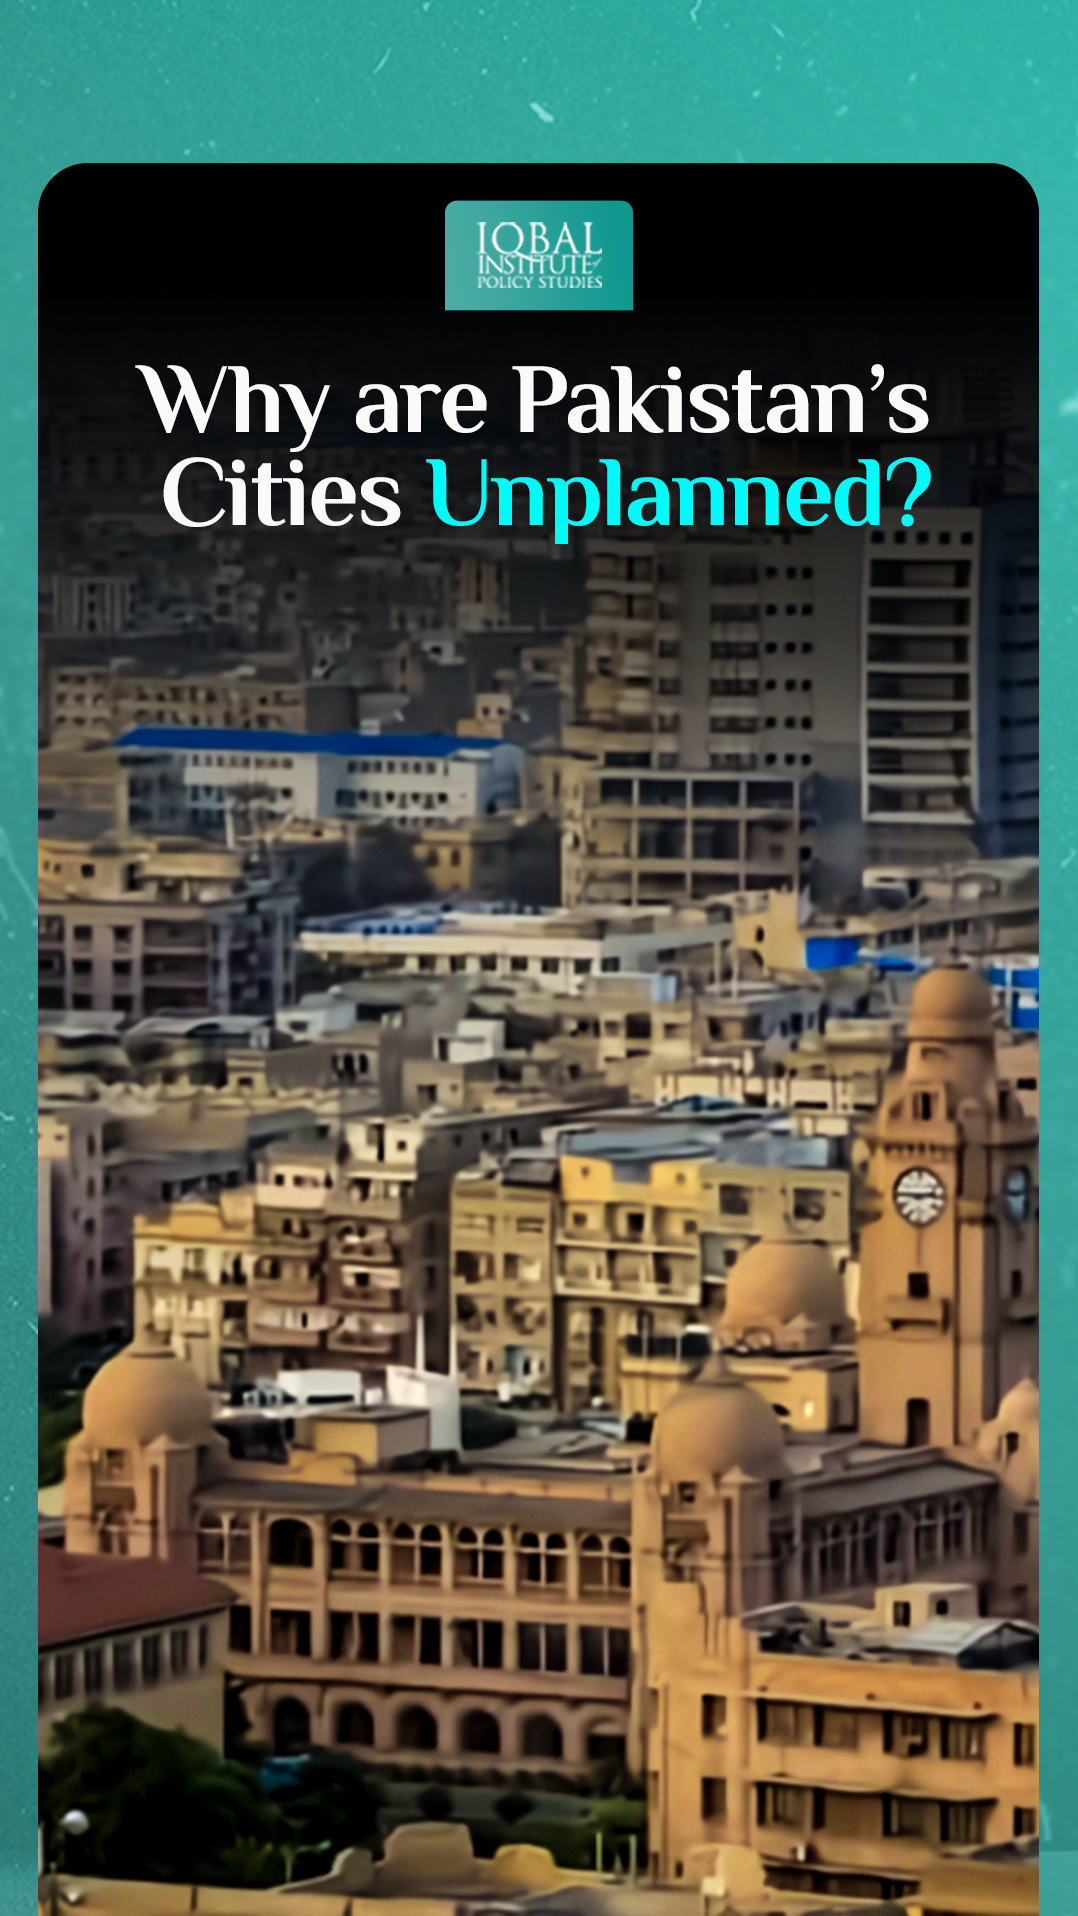 Why are Pakistan’s Cities Unplanned?